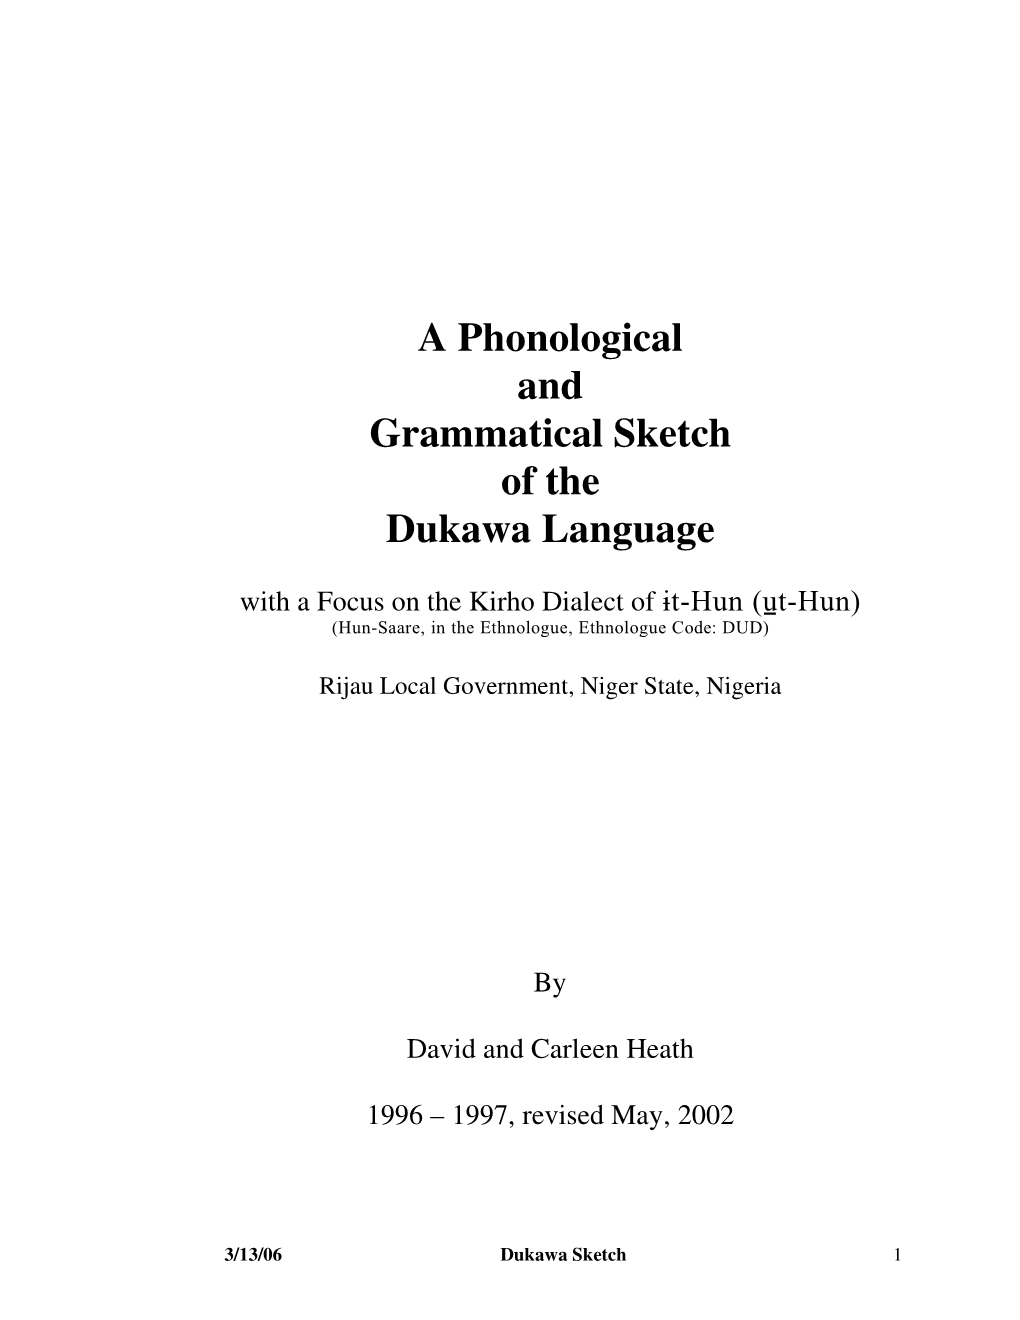 A Phonological and Grammatical Sketch of the Dukawa Language